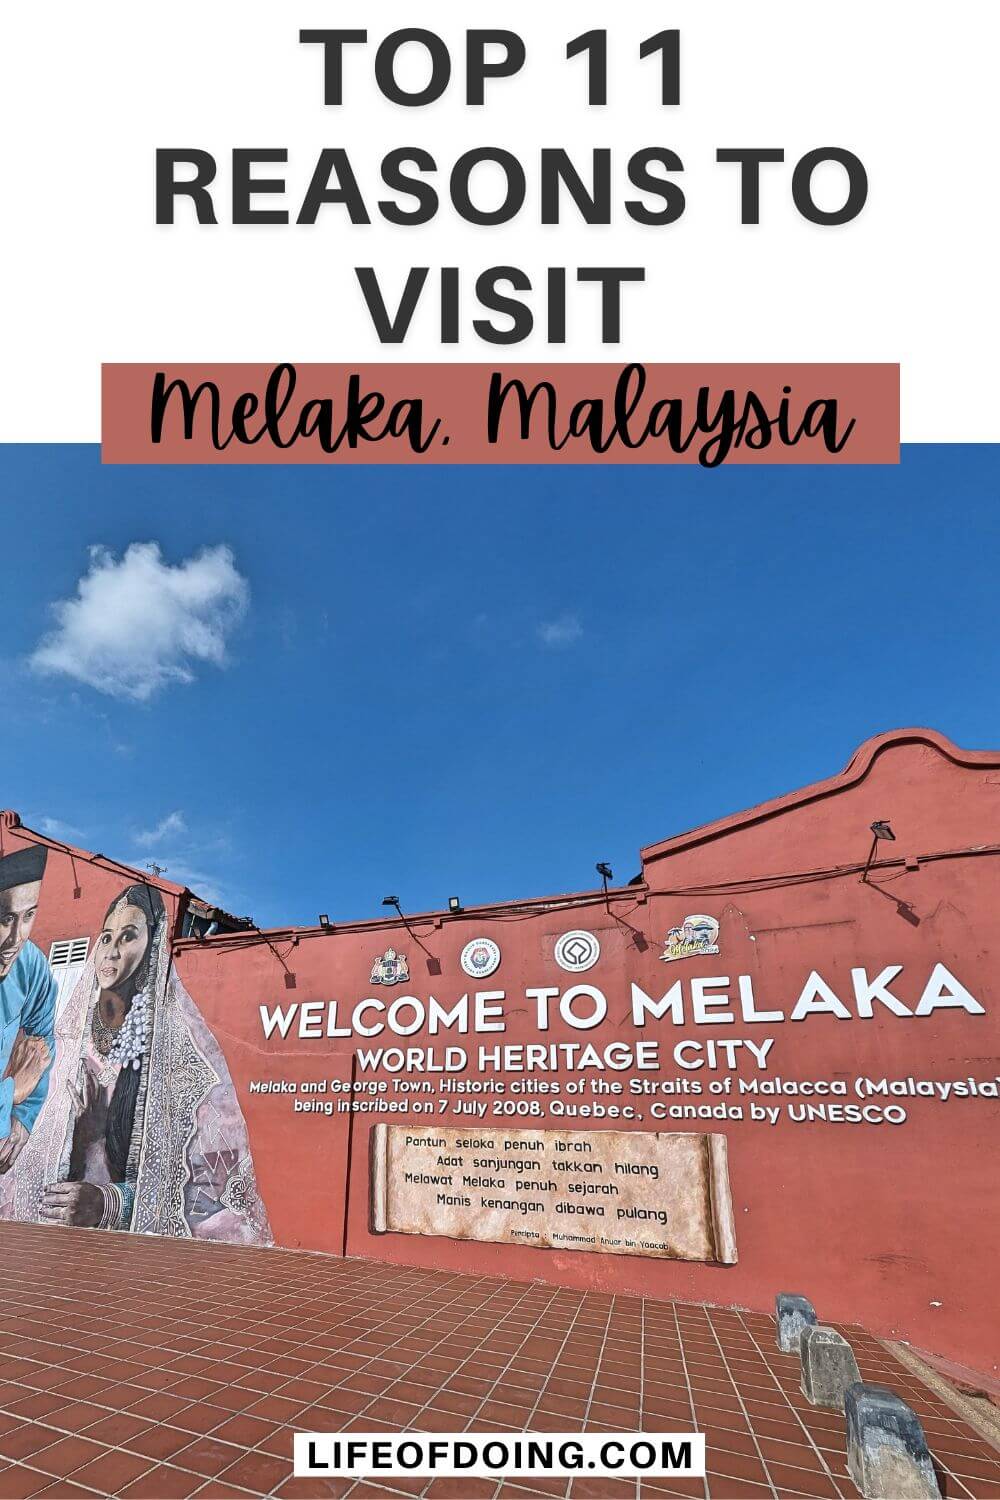 A red brick colored wall with a Welcome to Melaka World Heritage City sign and murals of a Malaysian man and woman